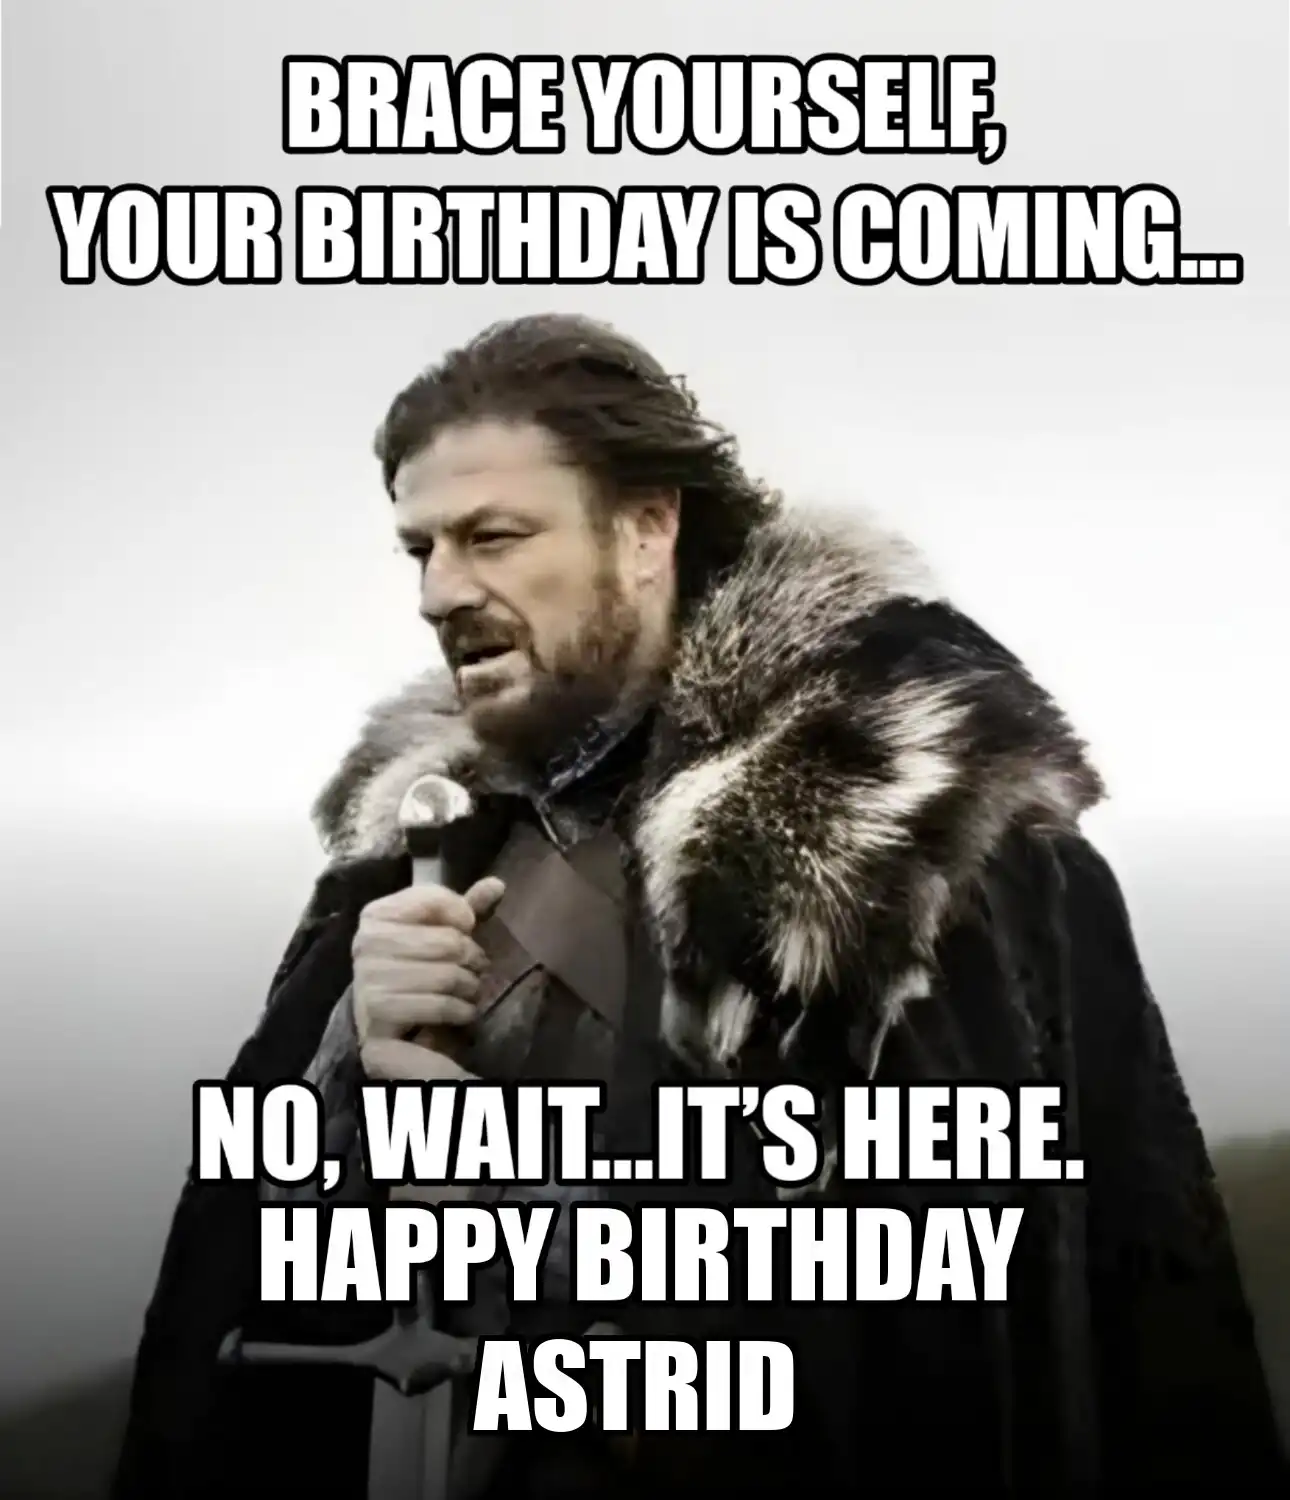 Happy Birthday Astrid Brace Yourself Your Birthday Is Coming Meme